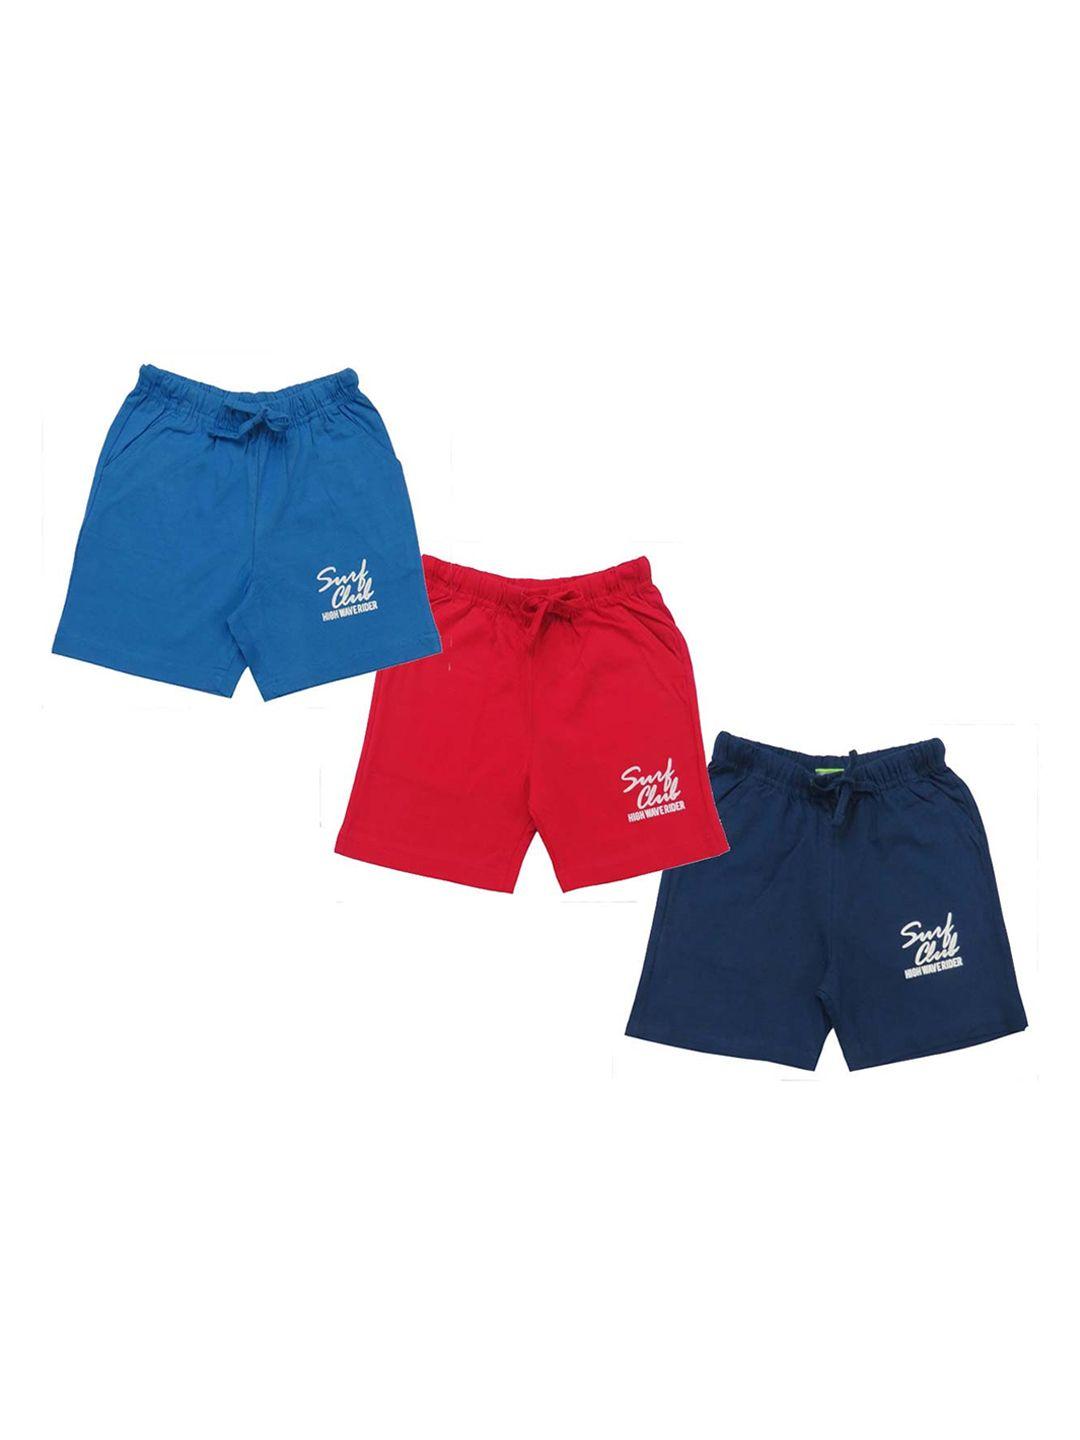 clothe funn boys pack of 3 mid-rise cotton shorts